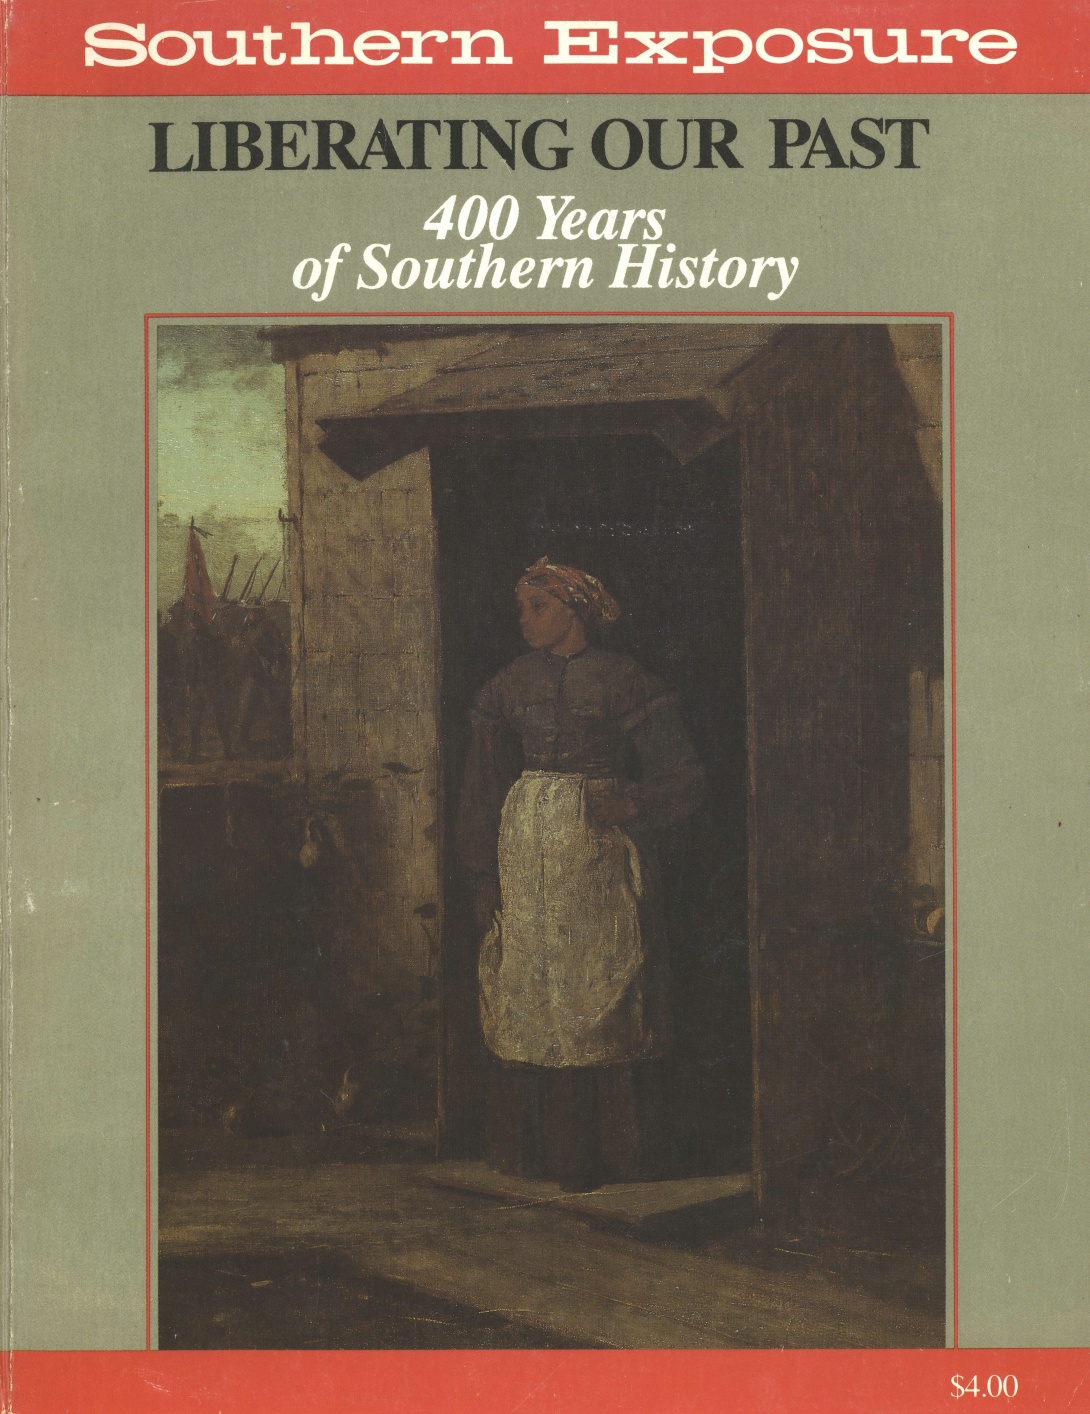 Magazine cover with painting of young Black girl in turban and apron standing in a doorway